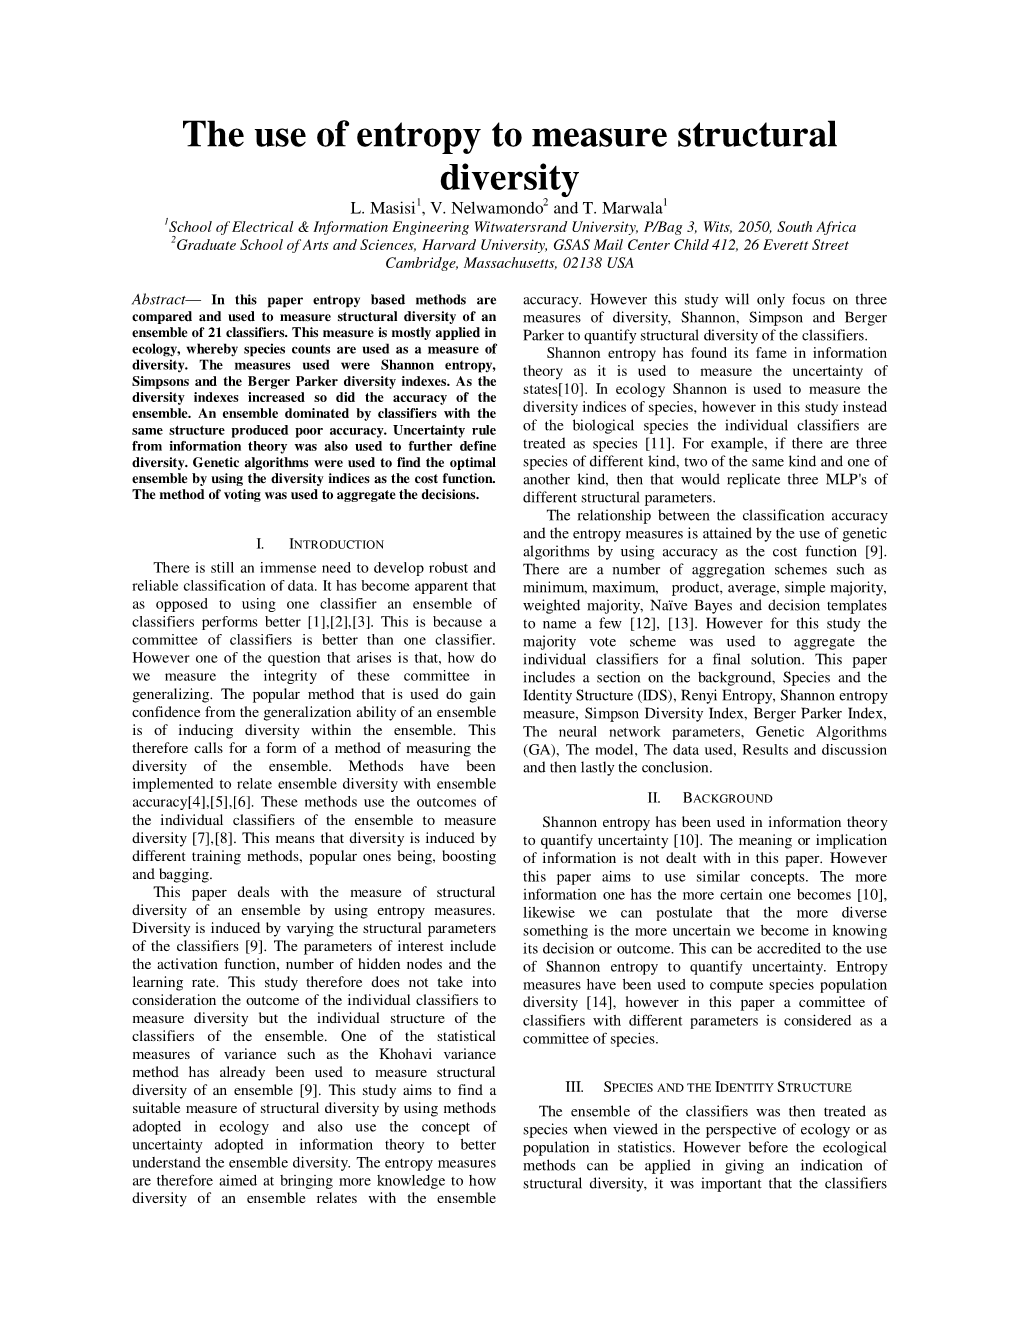 The Use of Entropy to Measure Structural Diversity